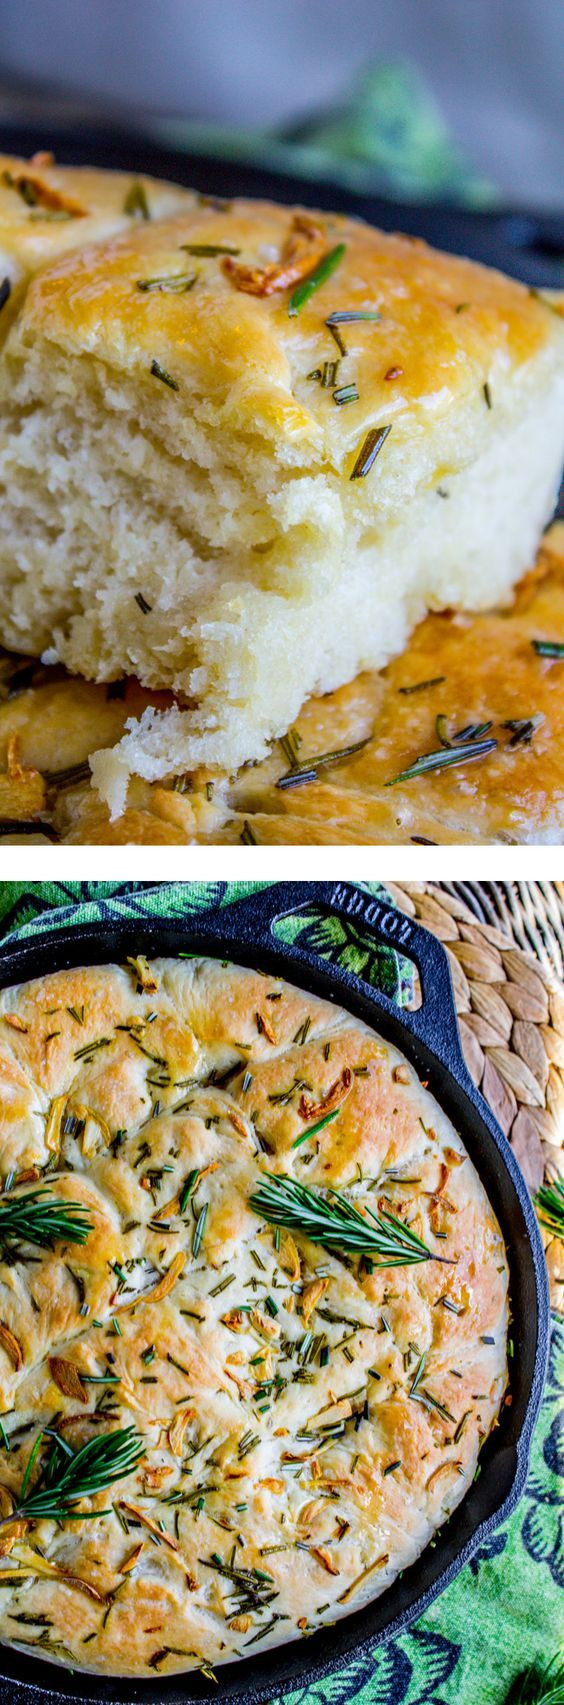 Creative Side Dishes
 Creative Thanksgiving Side Dishes on Pinterest Crave Du Jour